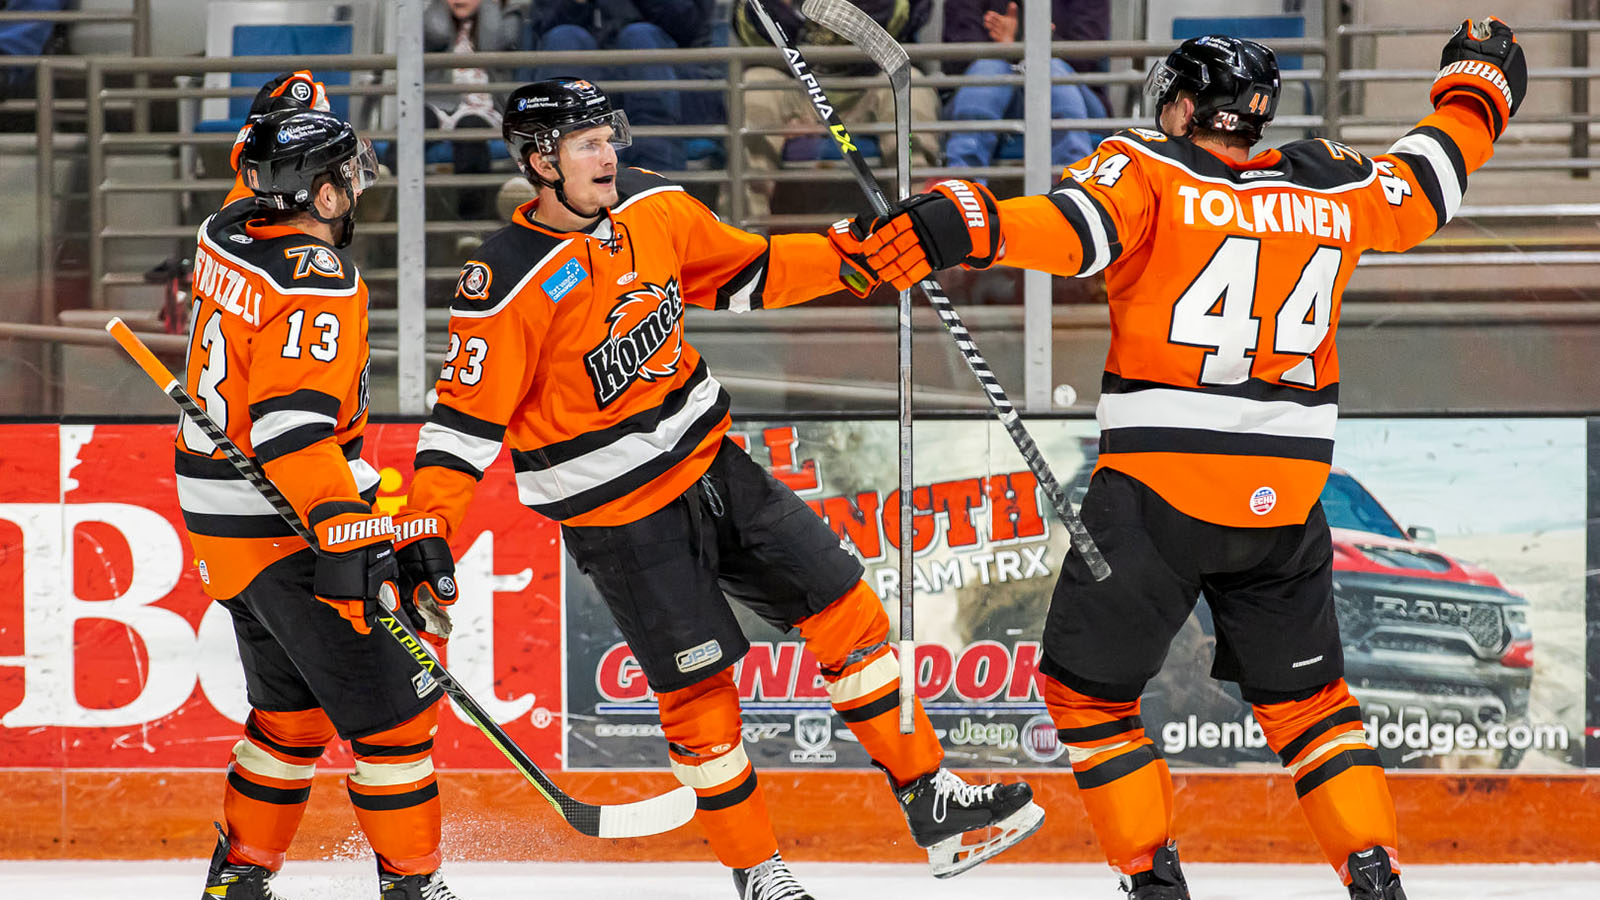 Komets fans drawn to good hockey, promotions — Whatzup